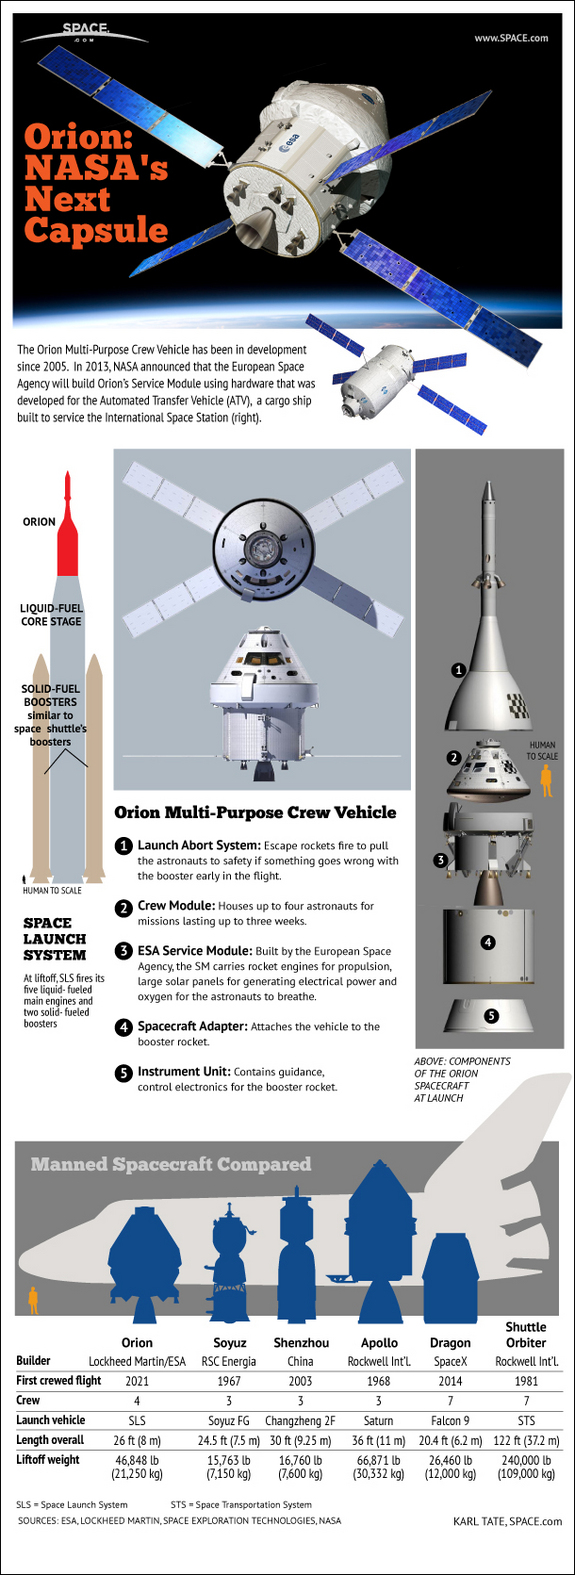 Find out the details of NASA's new Orion 4-person crew capsule, in this SPACE.com infographic.